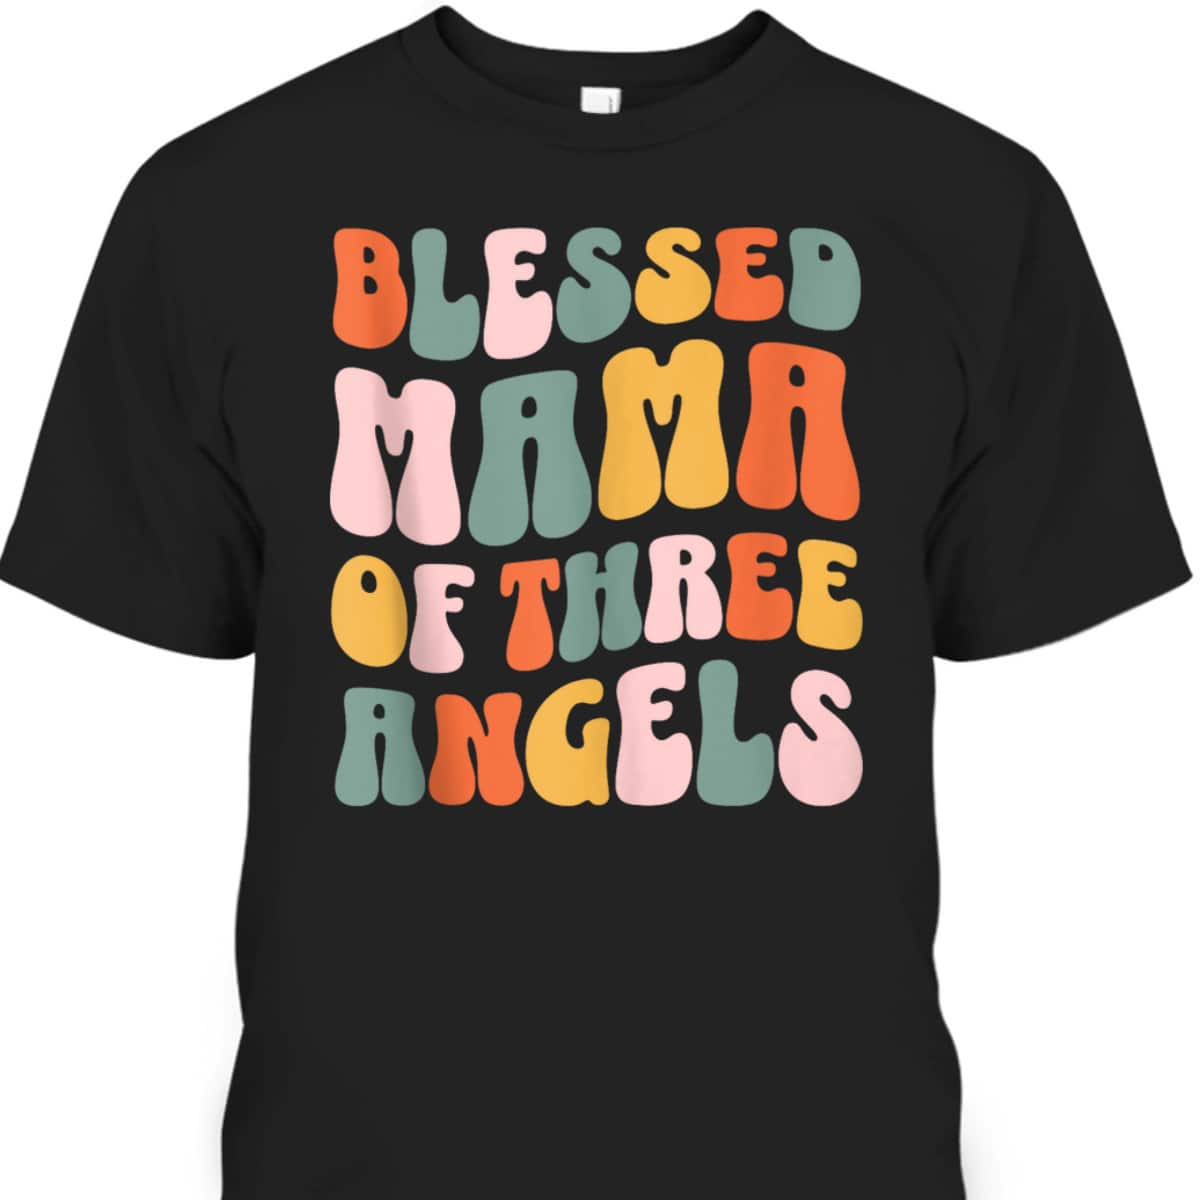 Mama Of Three Angels Mother's Day T-Shirt Gift For Christian Mom